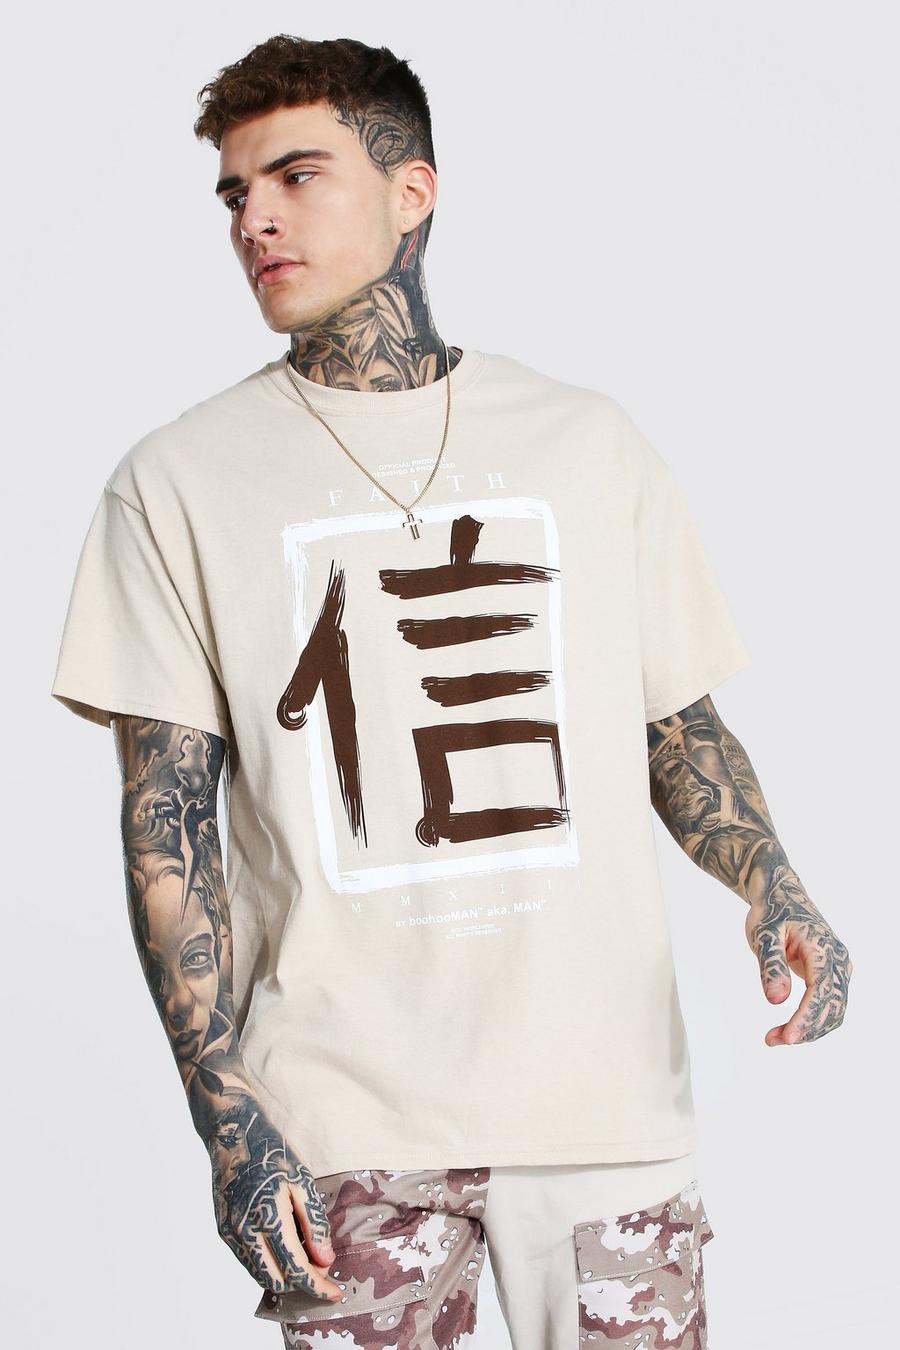 Photno Men Fashion Printed T Shirts Casual Funny Short Sleeve Graphic Top Cotton Tees 